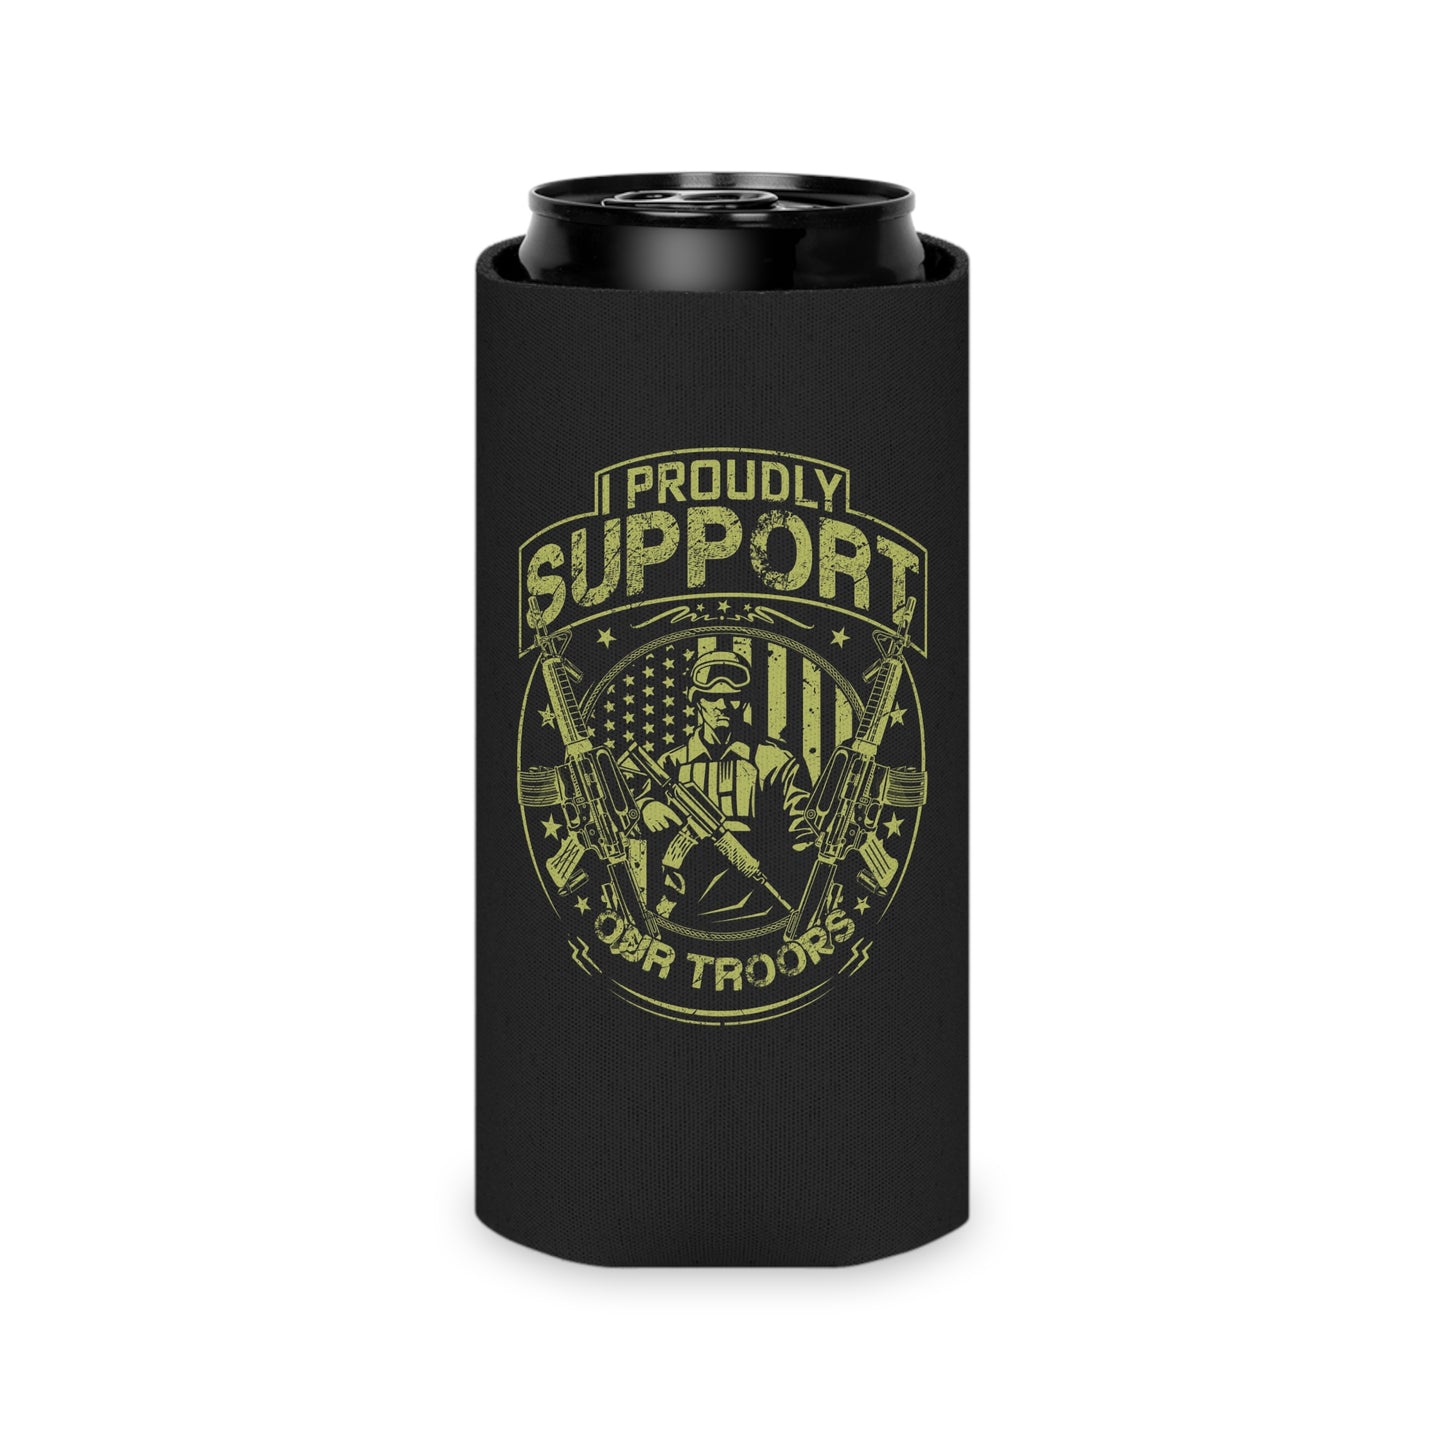 I Proudly Support Our Troops Coozie